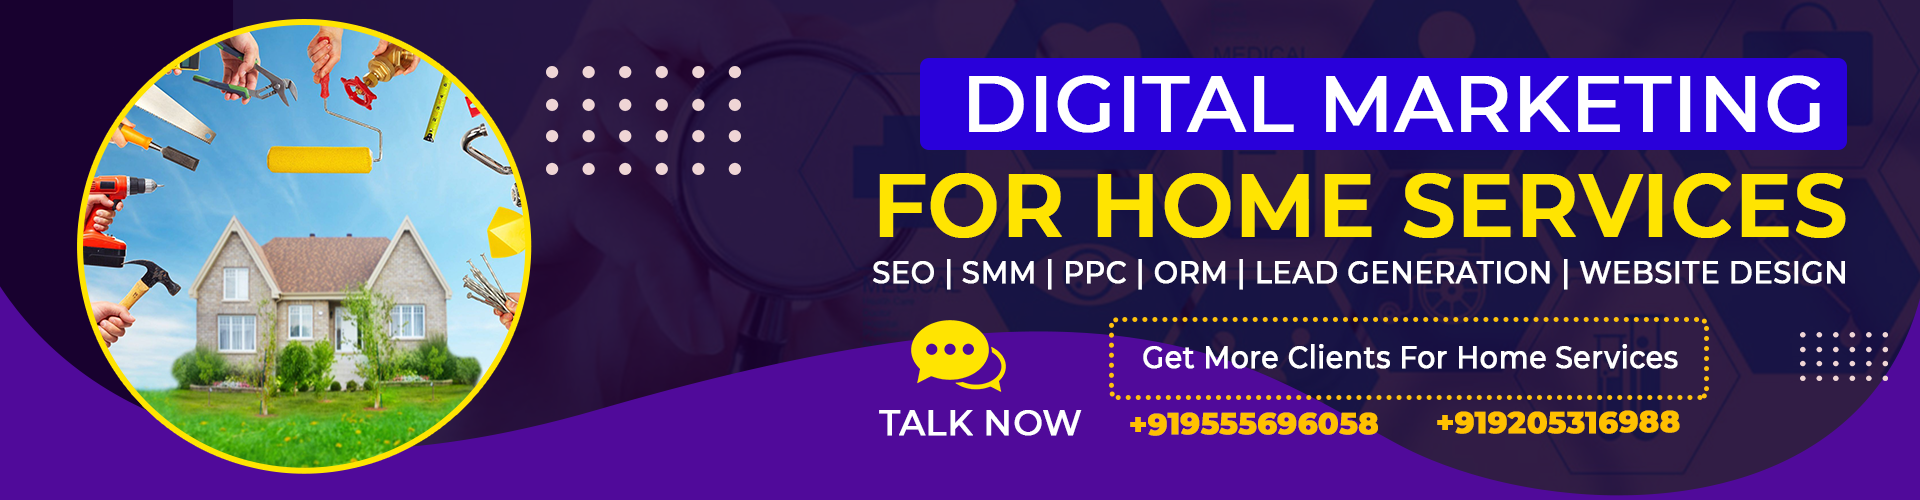 digital-marketing-for-home-services